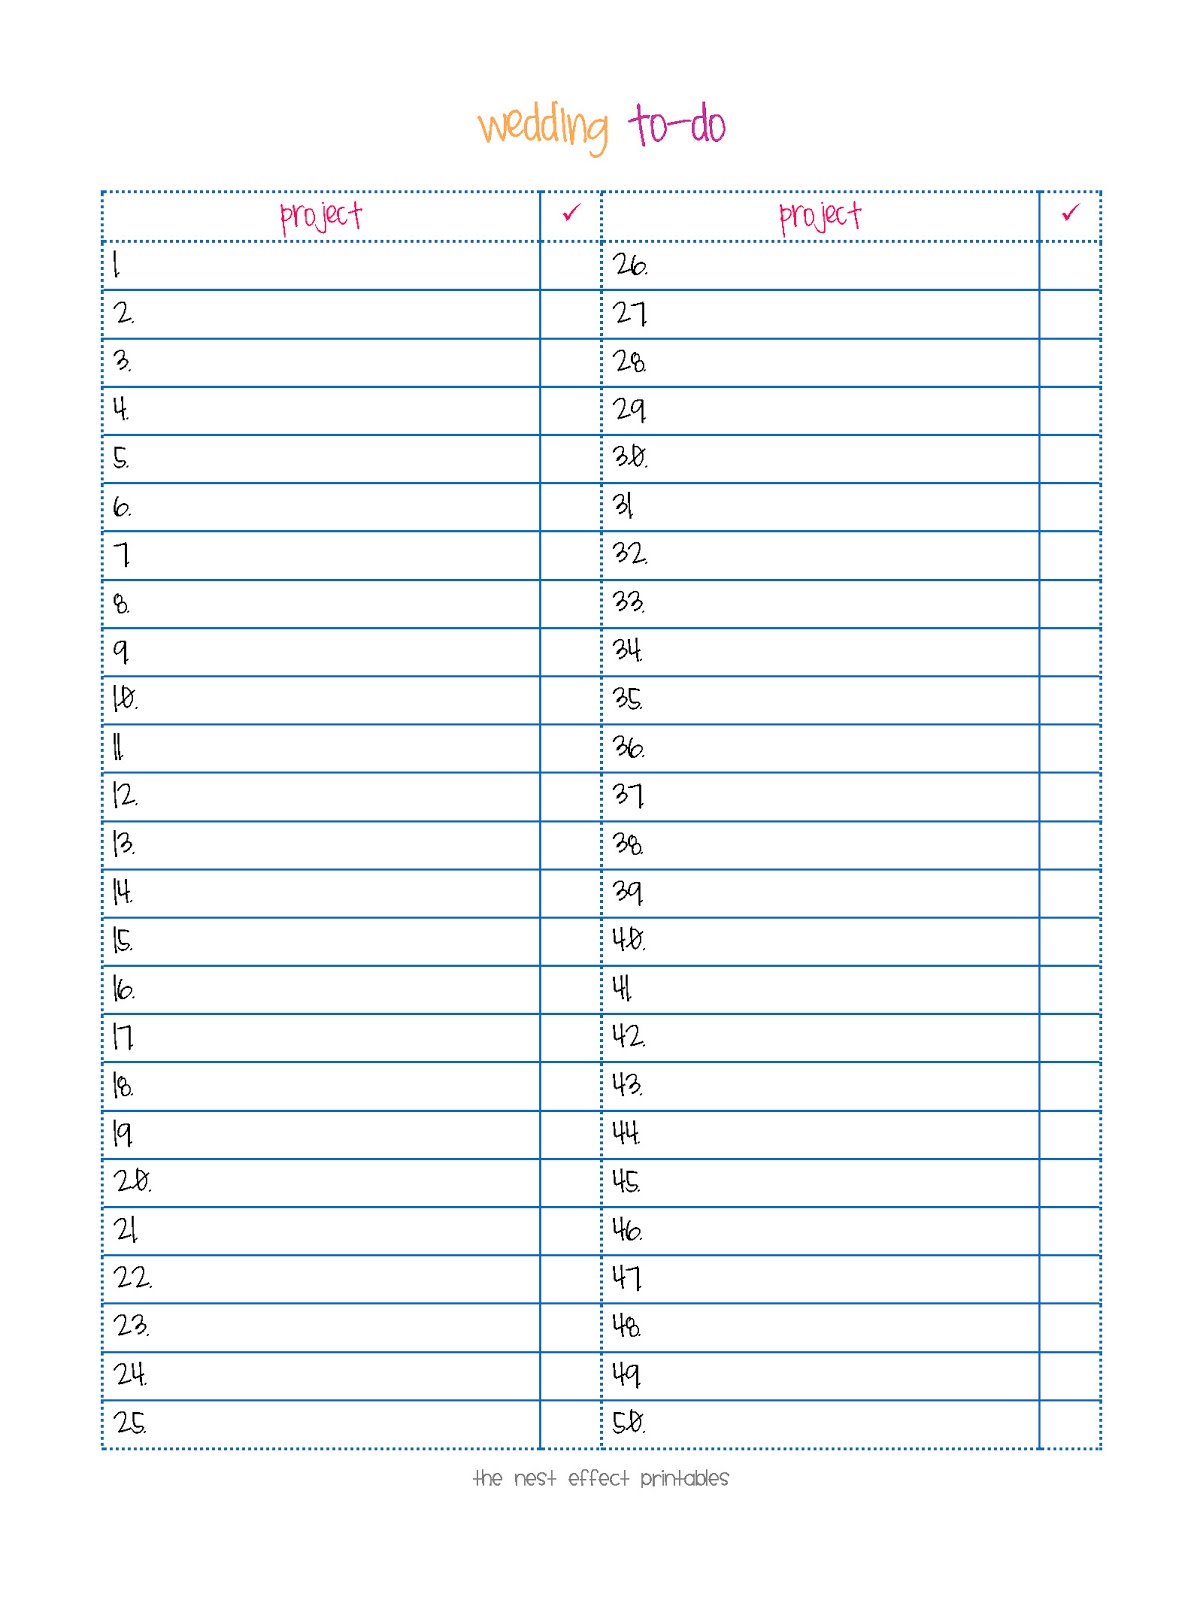 The Nest Effect: Free Printables: Documents Updated